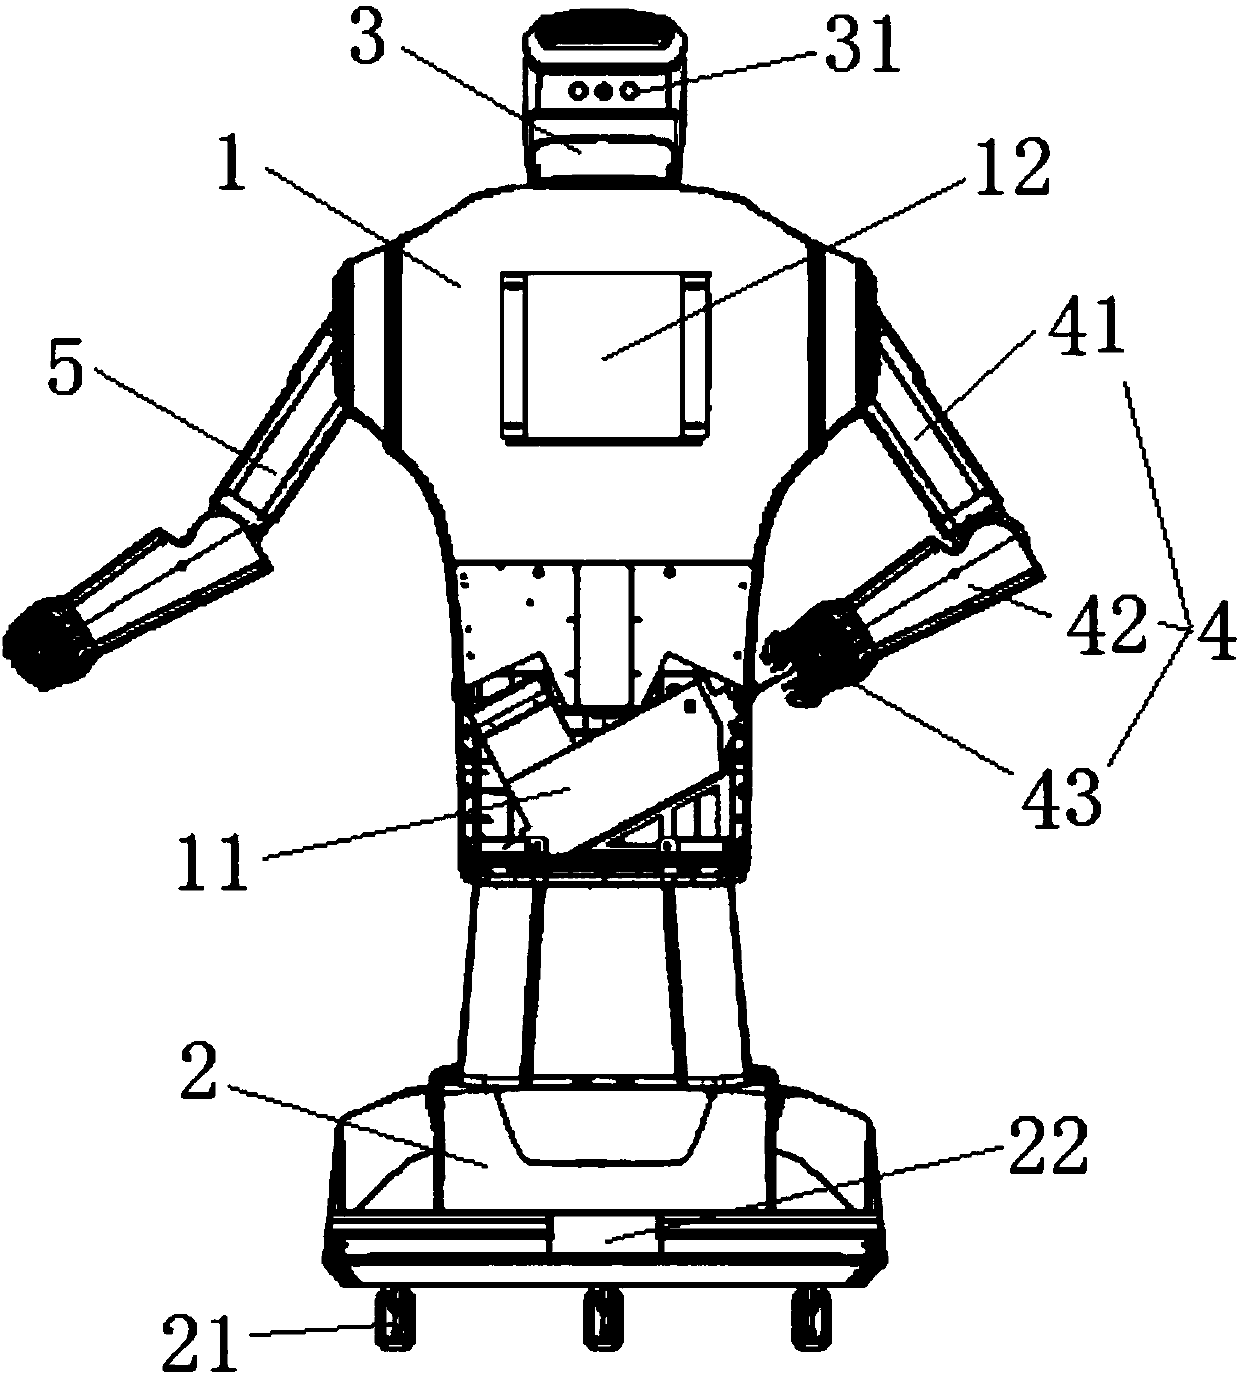 Card issuing robot with code scanning function